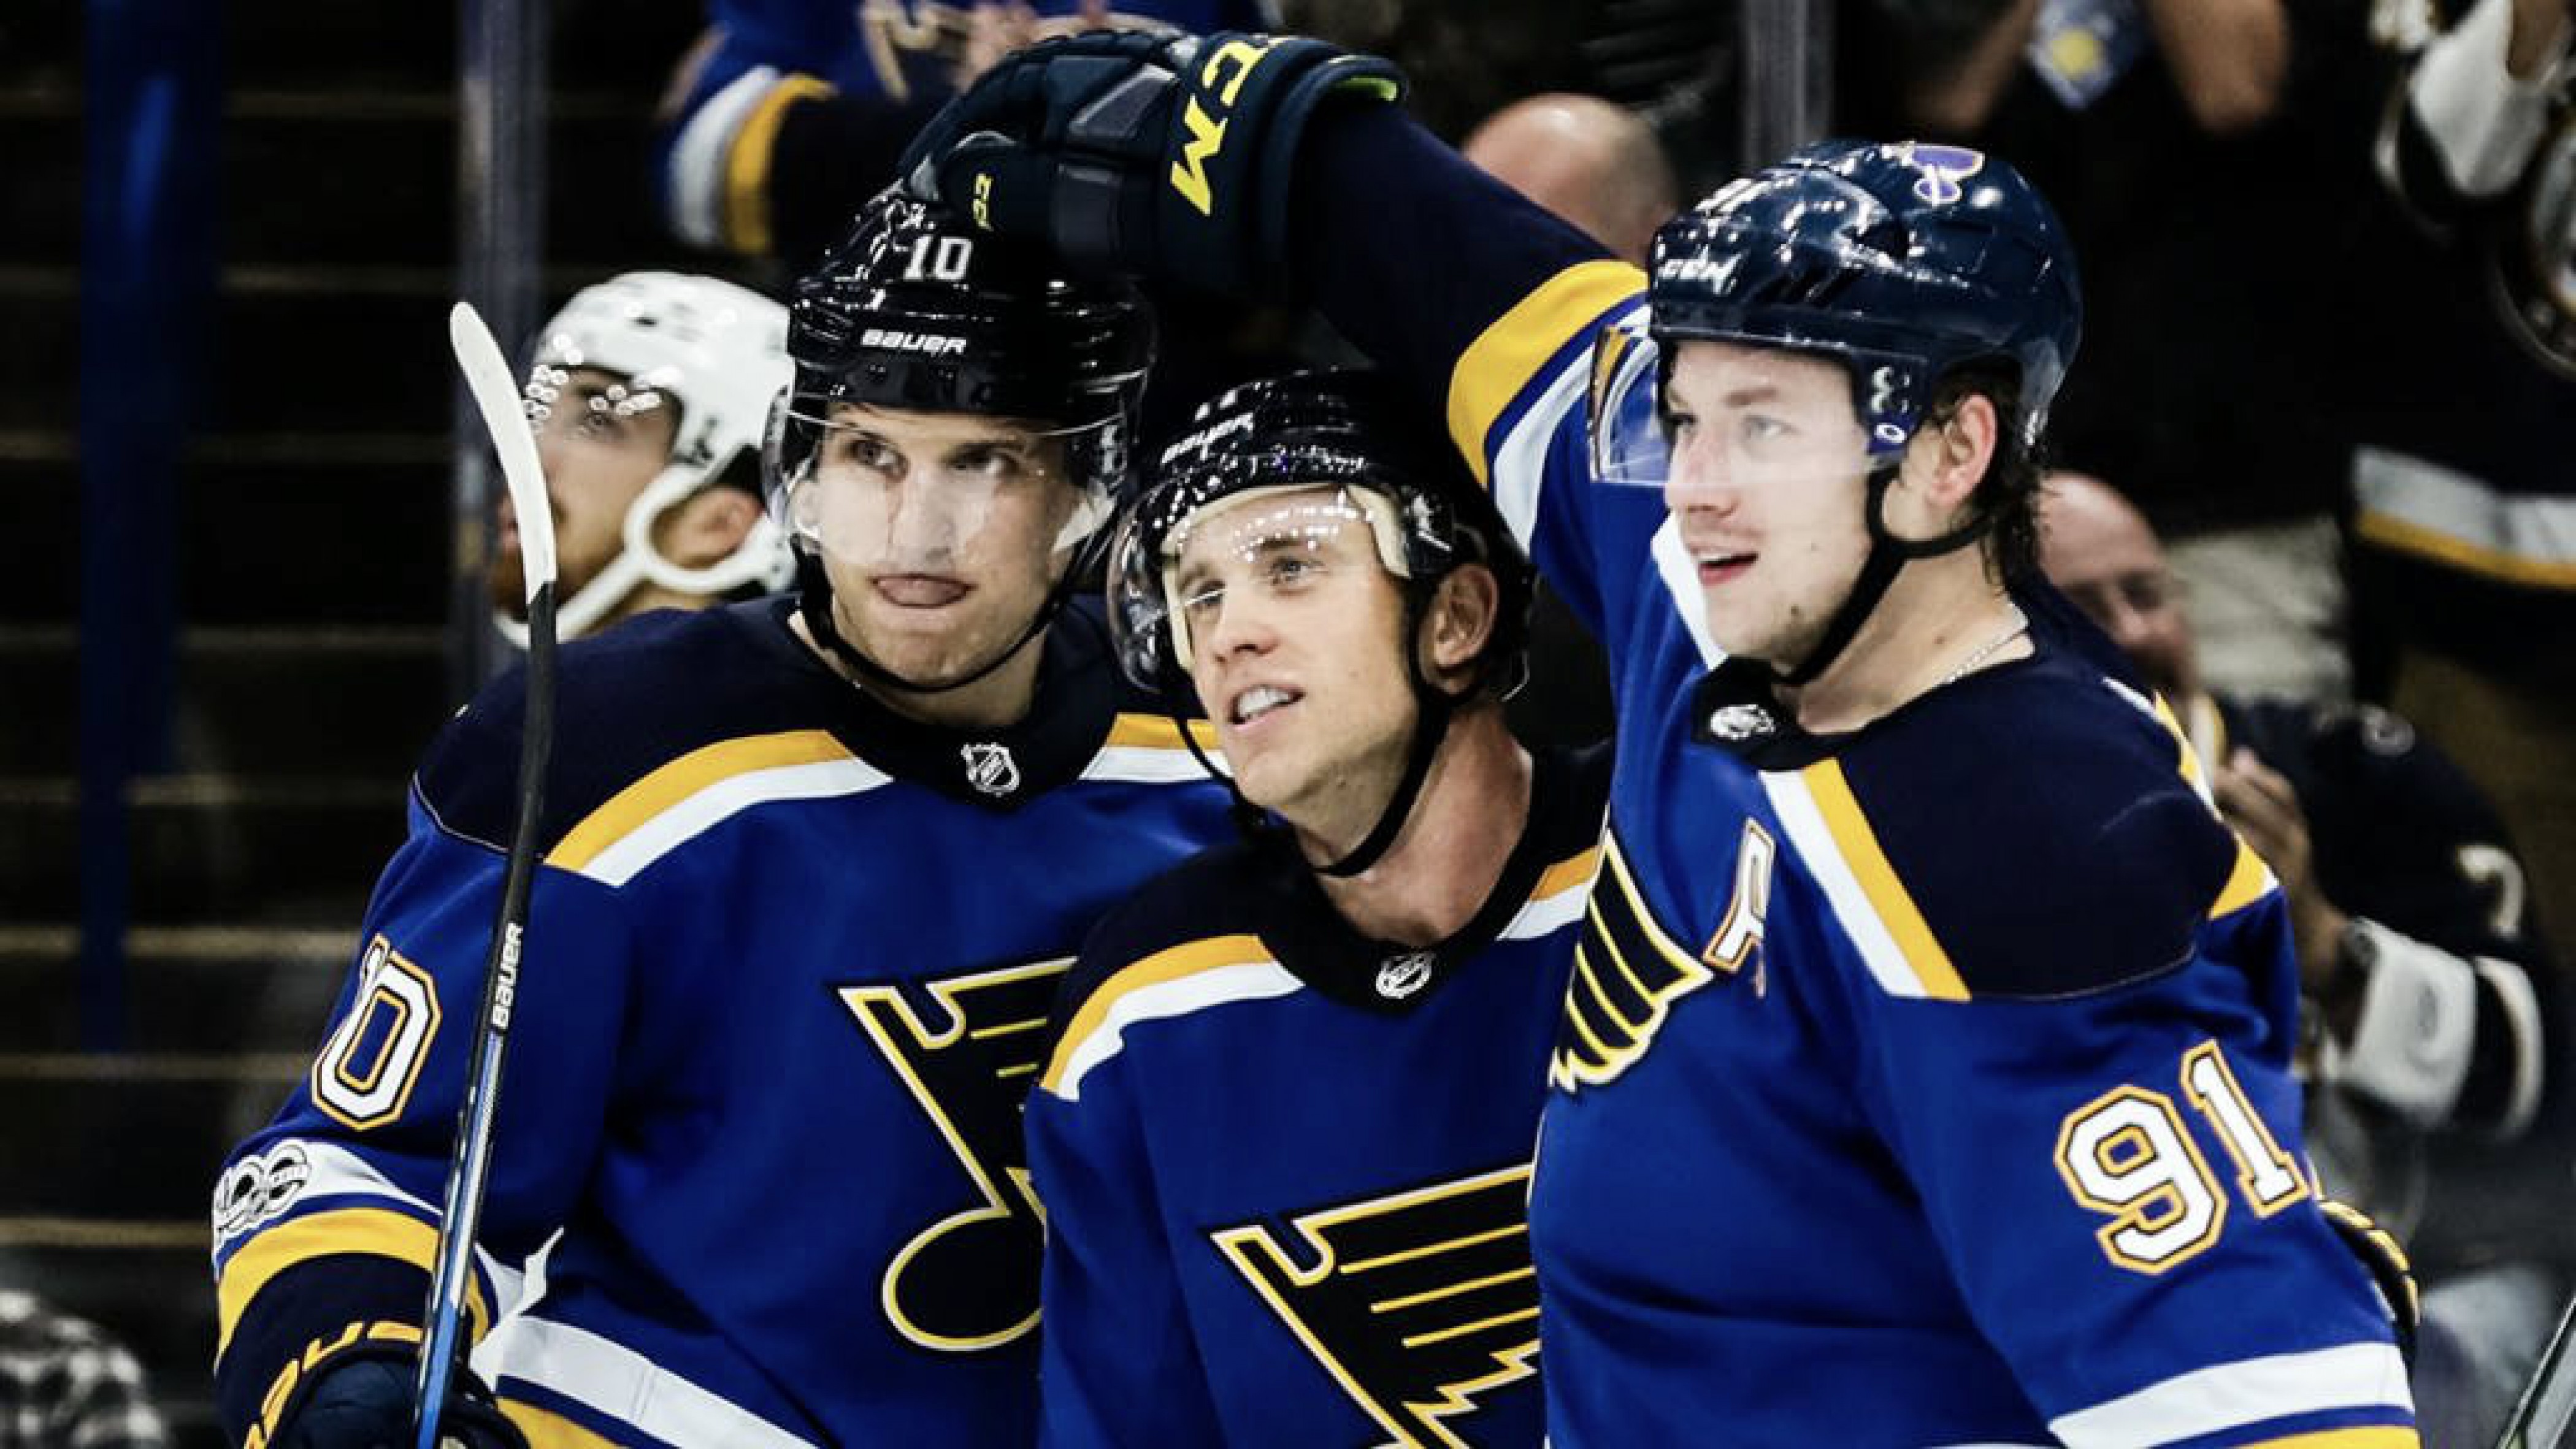 St. Louis Blues: Improved their roster significantly